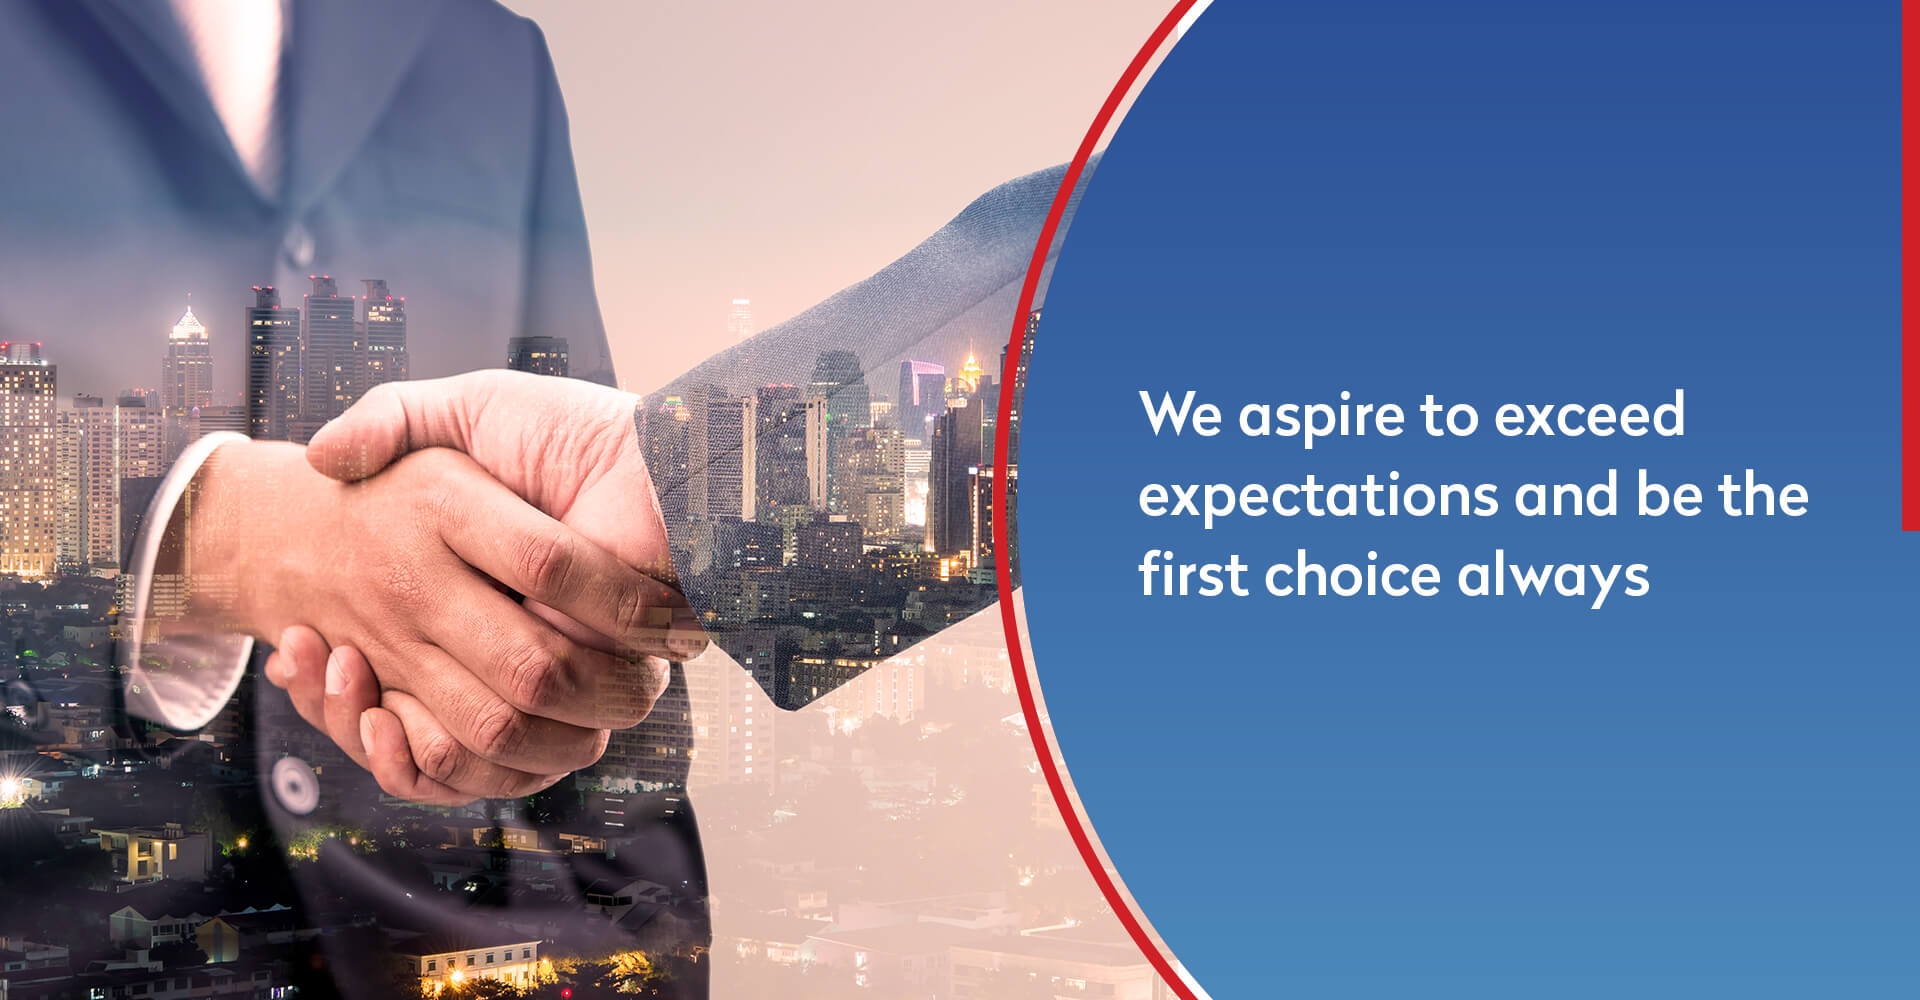 We aspire to exceed expectations and be the first choice always